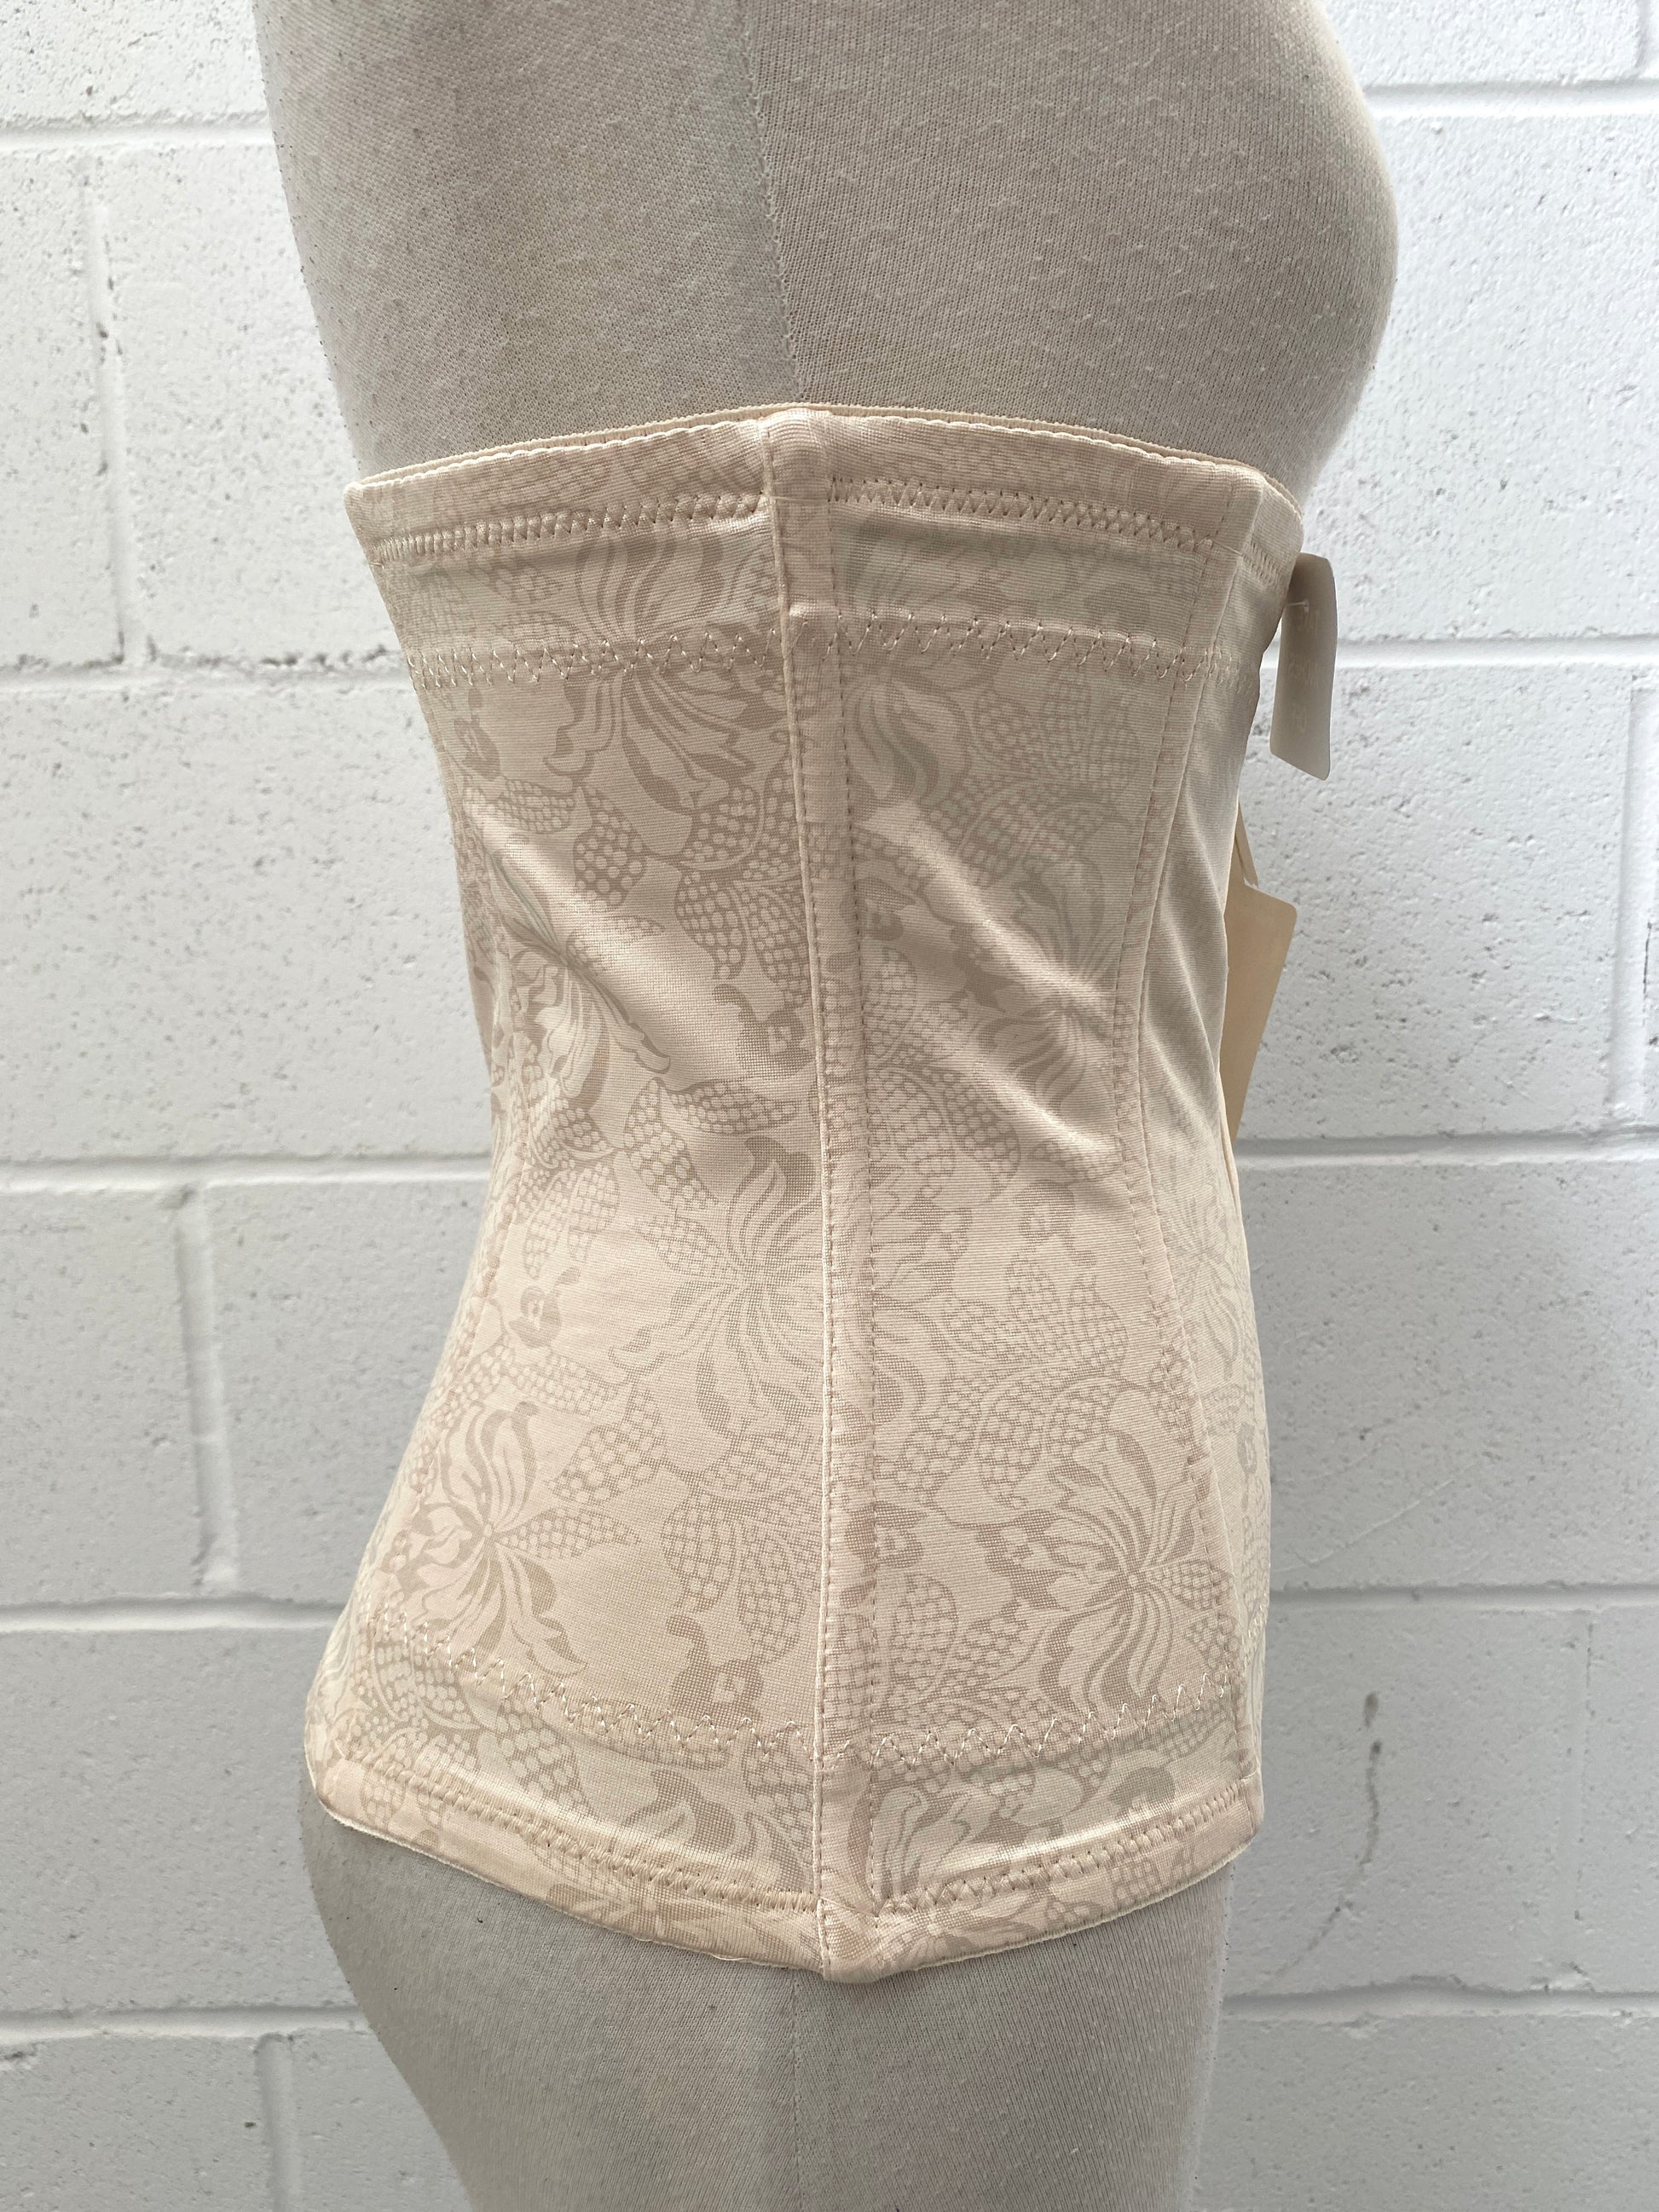 Vintage 1940s laced up corset girdle skirt in size 28 DEAD STOCK